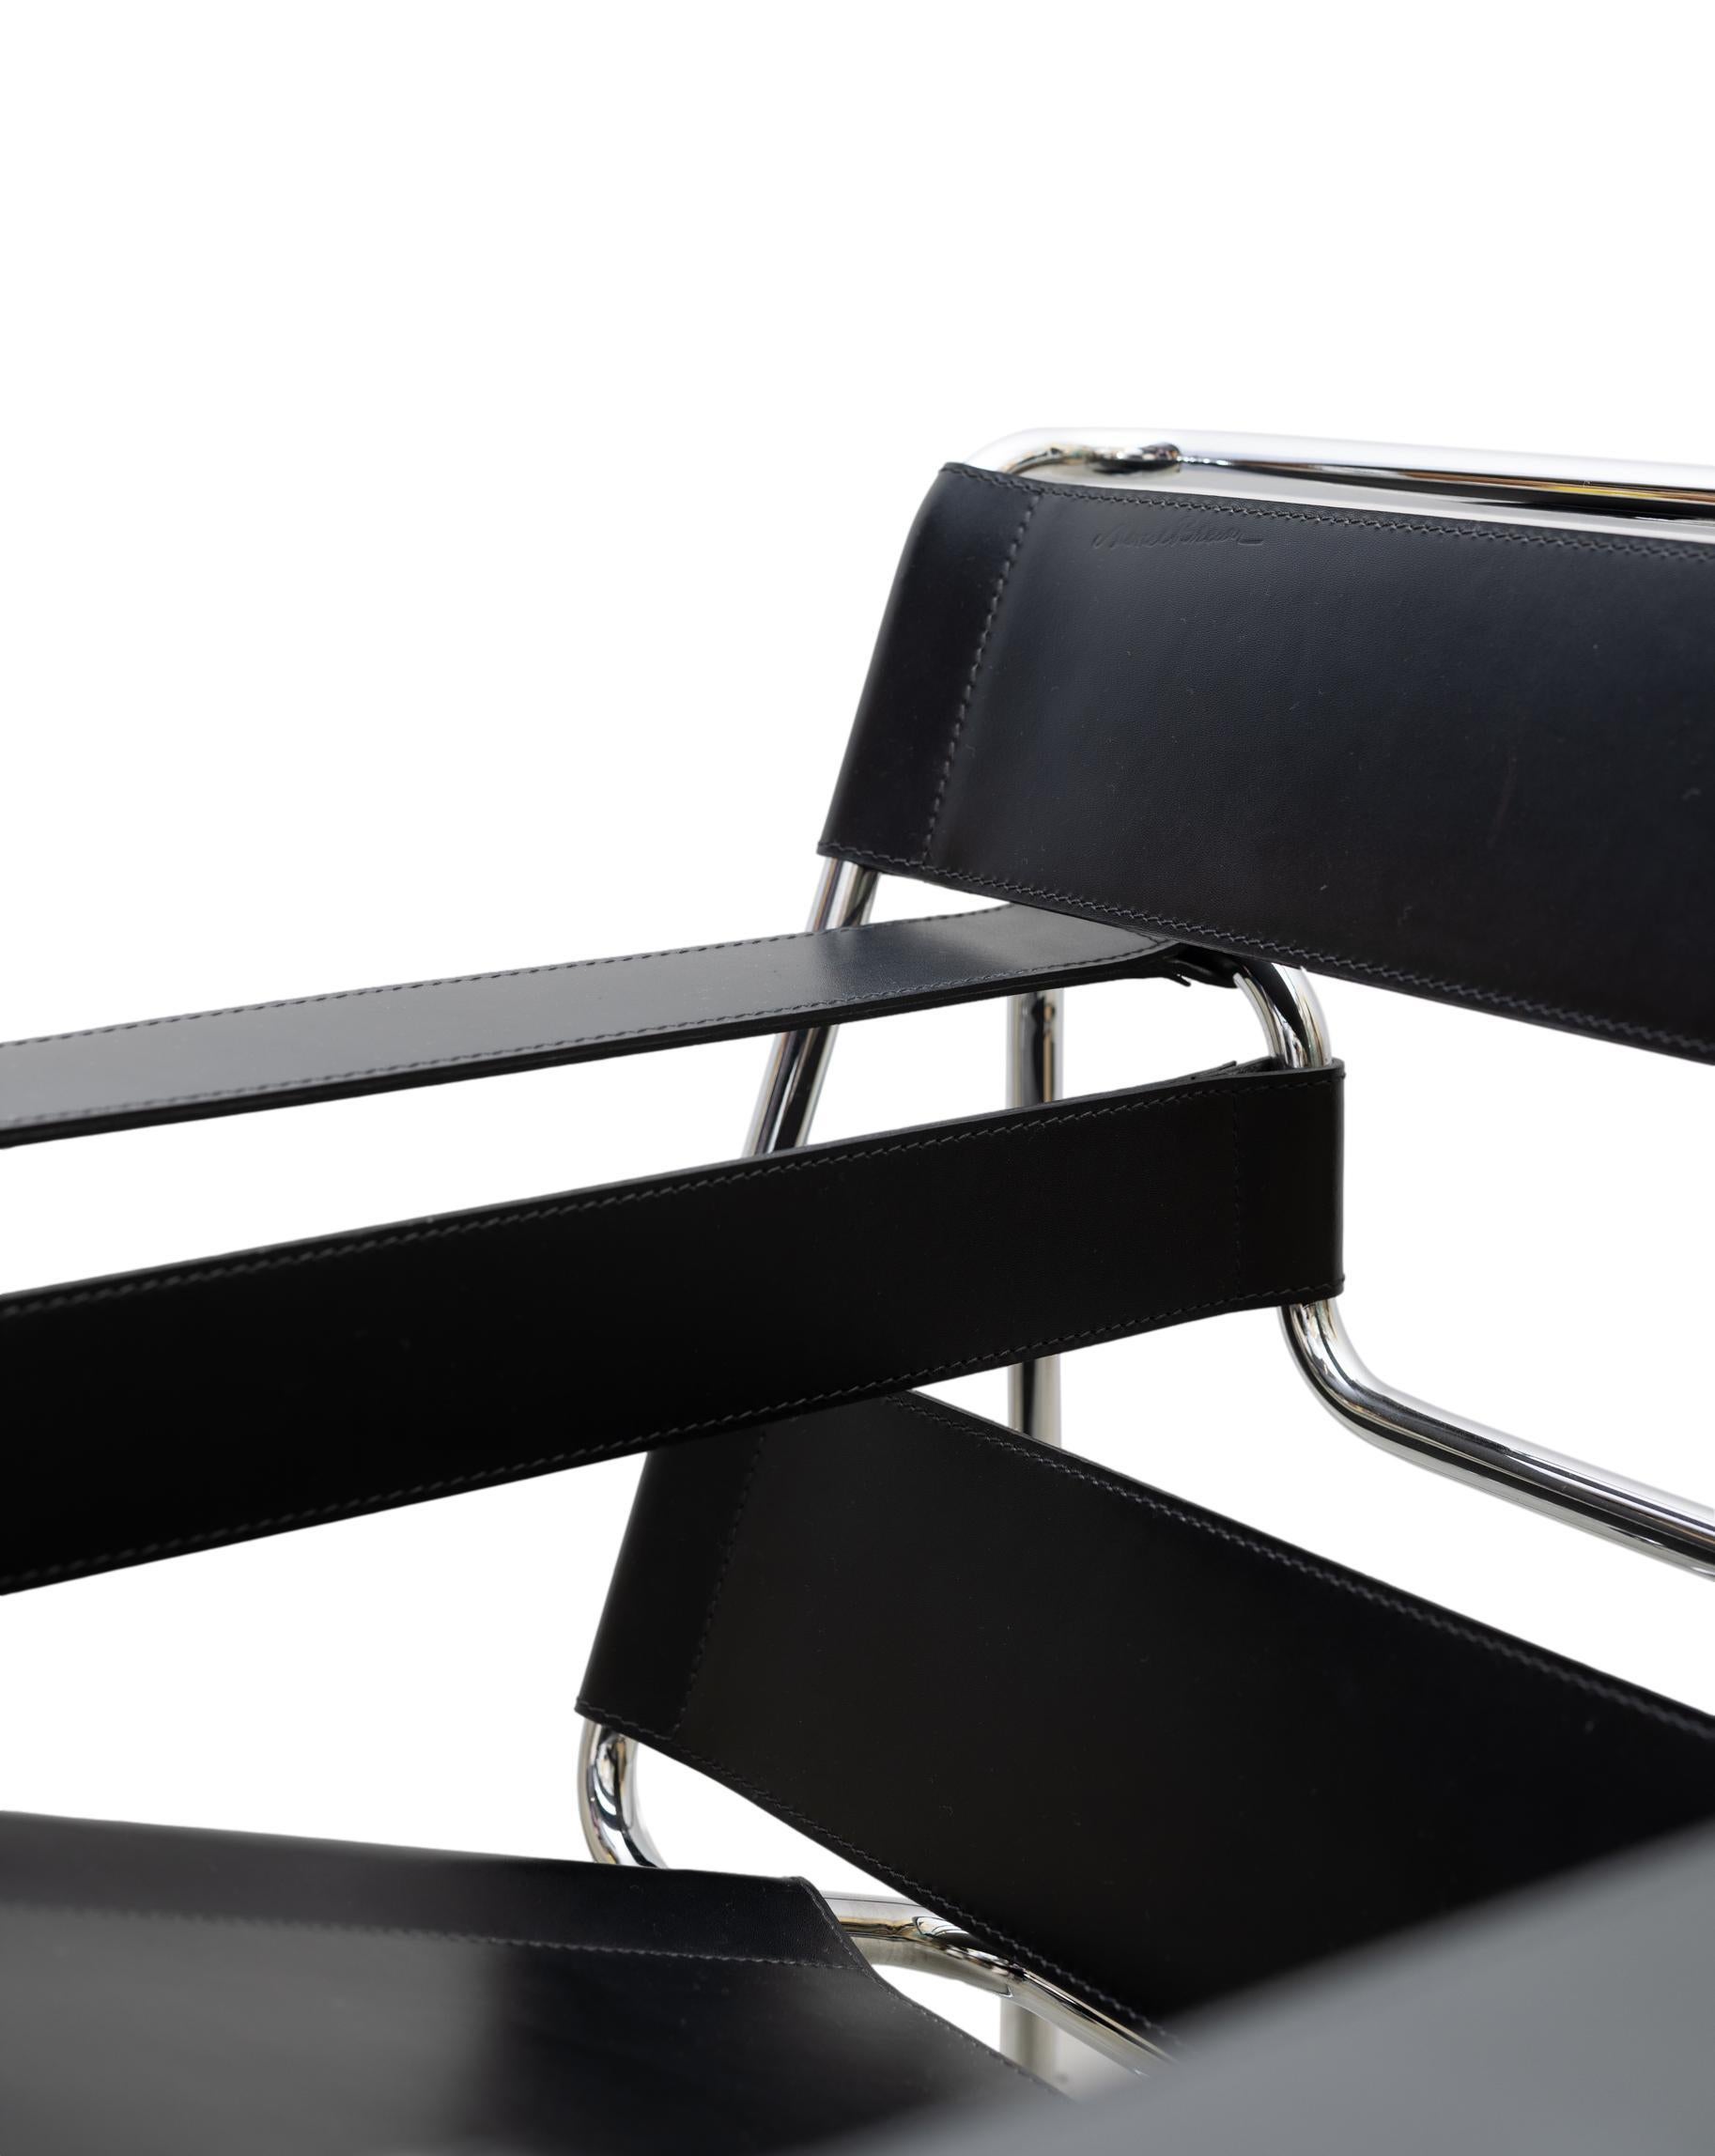 20th Century Pair Iconic Wassily Chairs B3, Marcel Breuer for Knoll, Black Leather, Signed